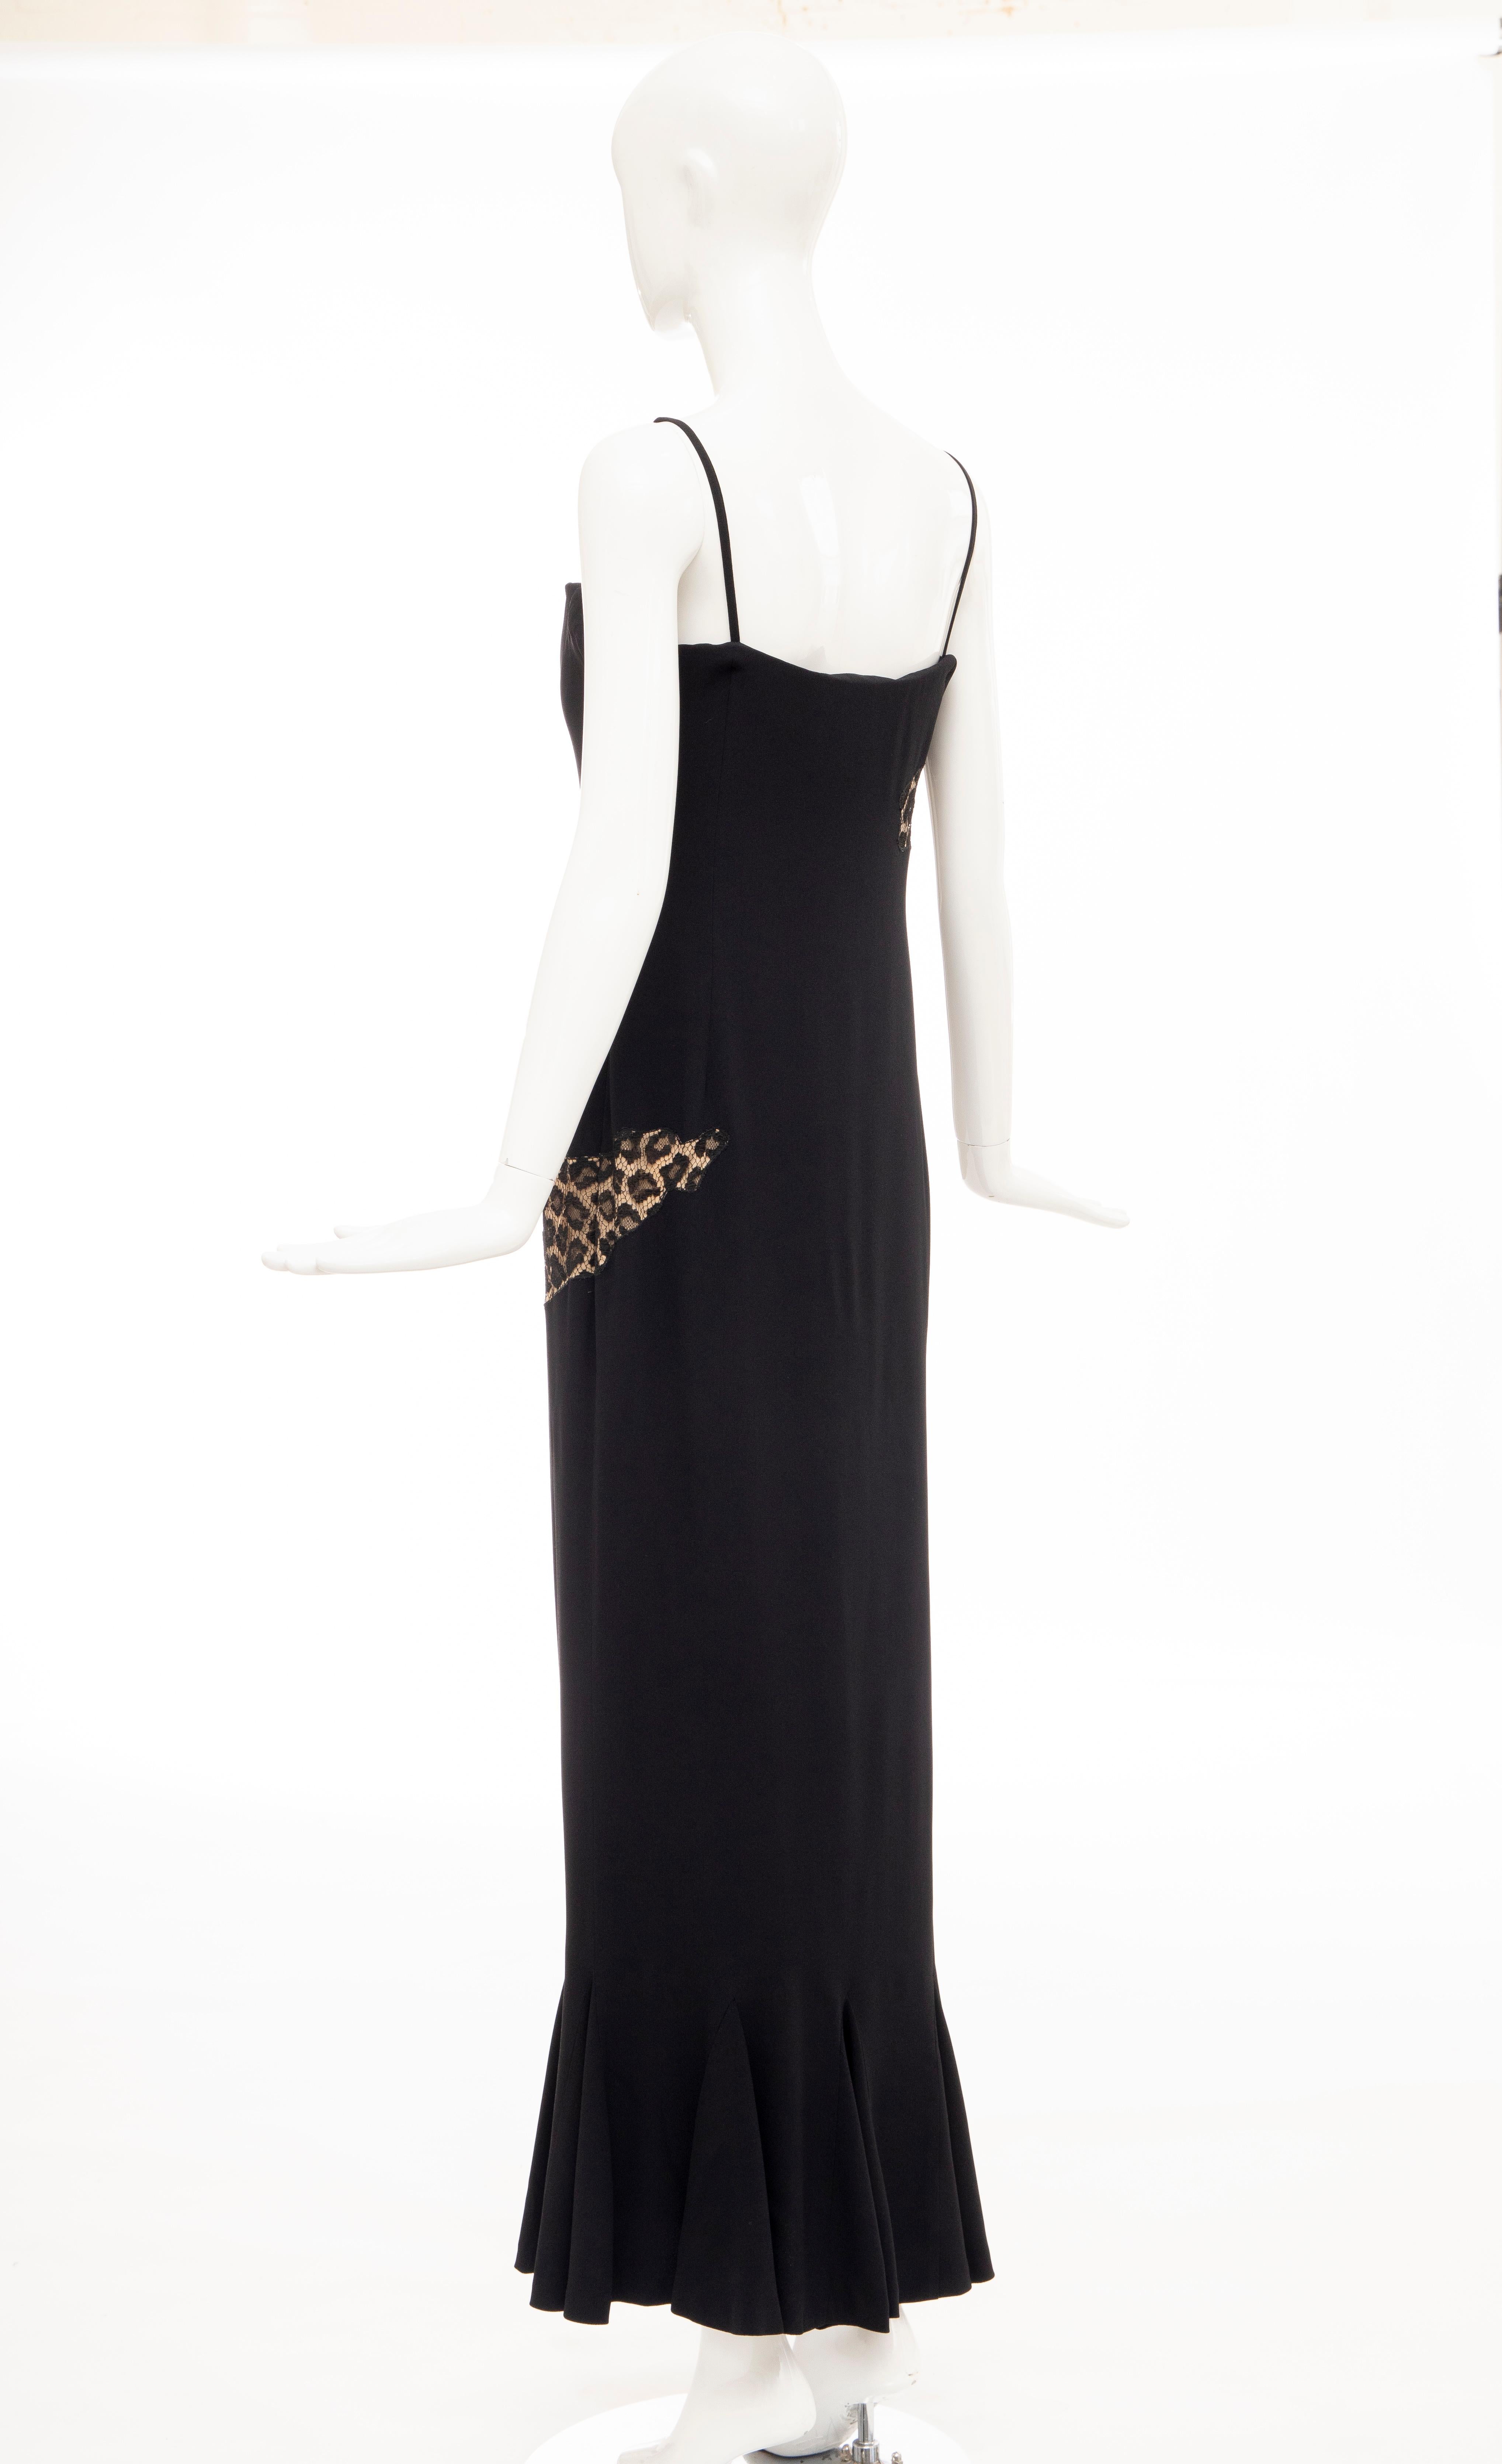 Alexander McQueen Givenchy Couture Black Leopard Lace Evening Dress, Fall 1997 For Sale 2